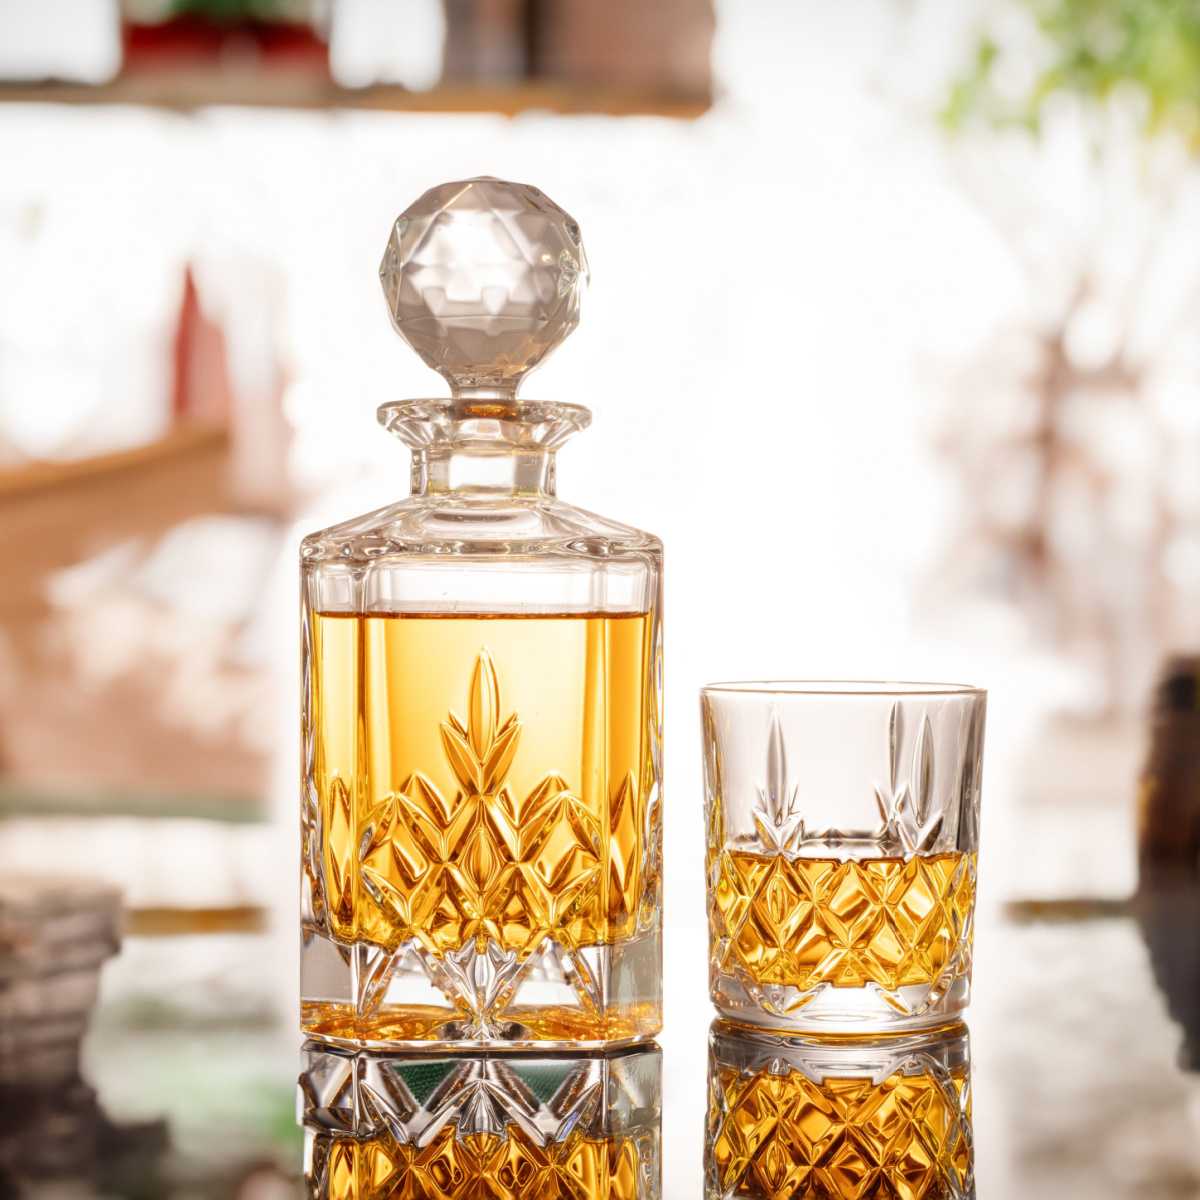 A glass decanter of gold rum sitting on a table next to a rocks glass with a pour of rum in it.